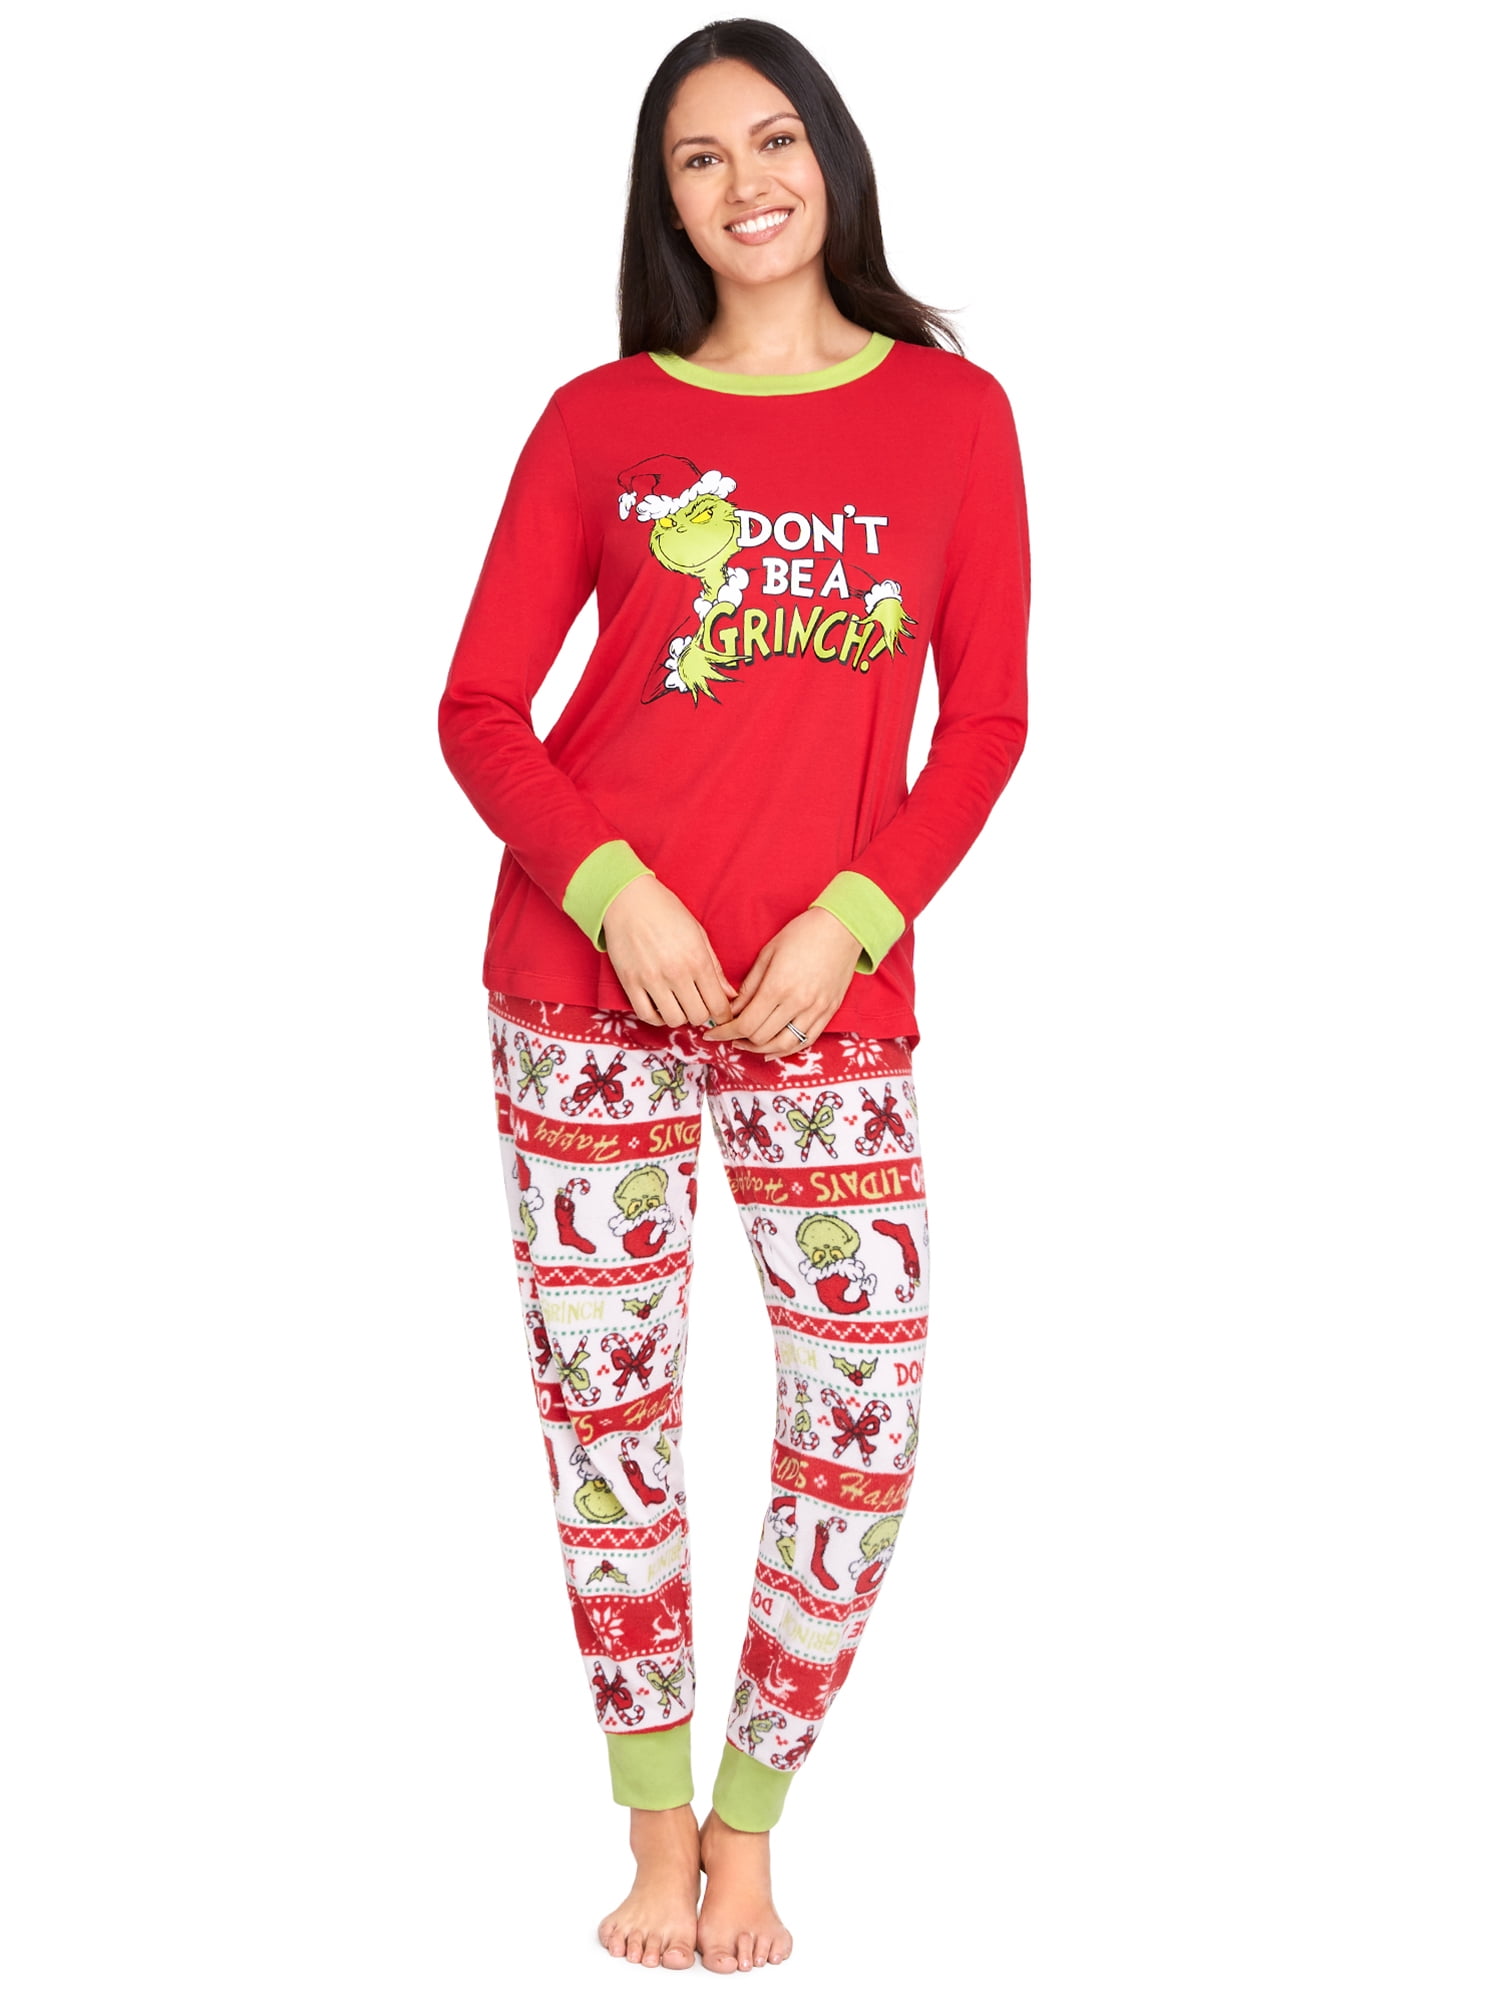 Grinch Family Matching Christmas Pajamas Long Sleeve Sets Round Neck Homewear Outfit Cotton Sleepwear Set Tight-fit 2-Piece Pajama Set